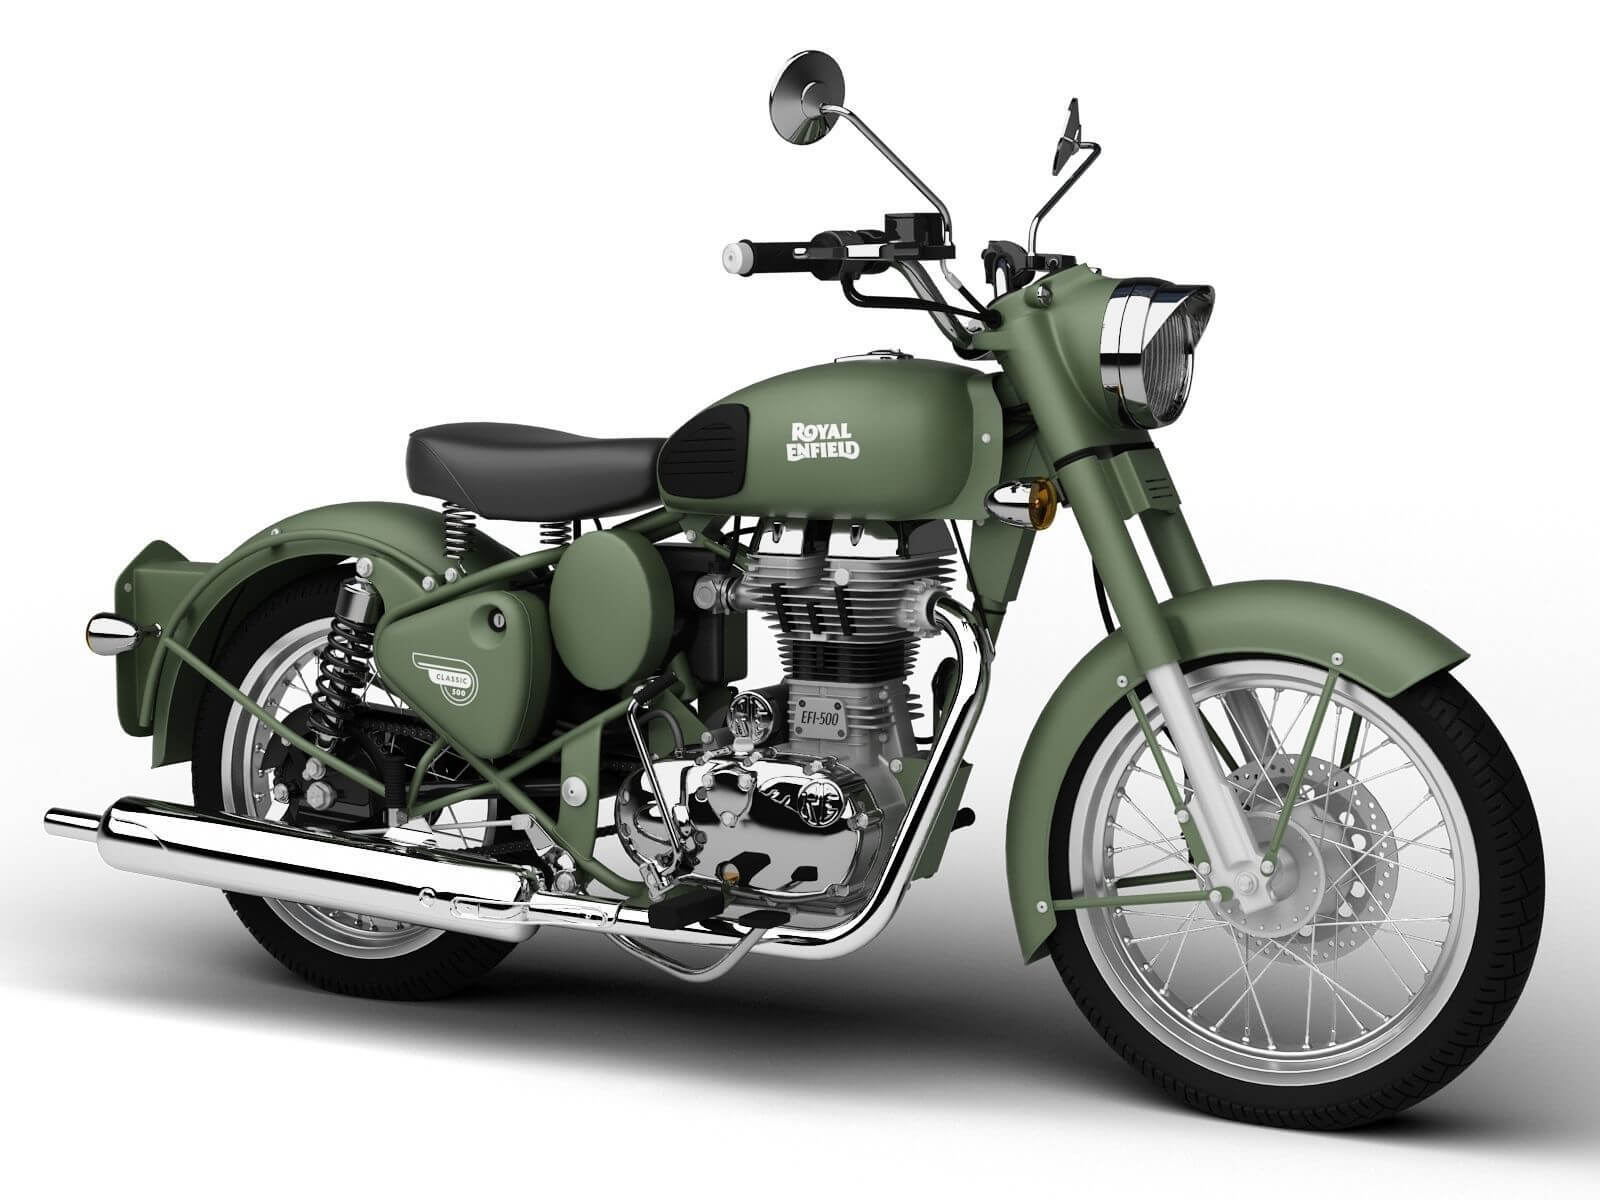 Royal Enfield Classic Battle Green Price in India, Classic Battle